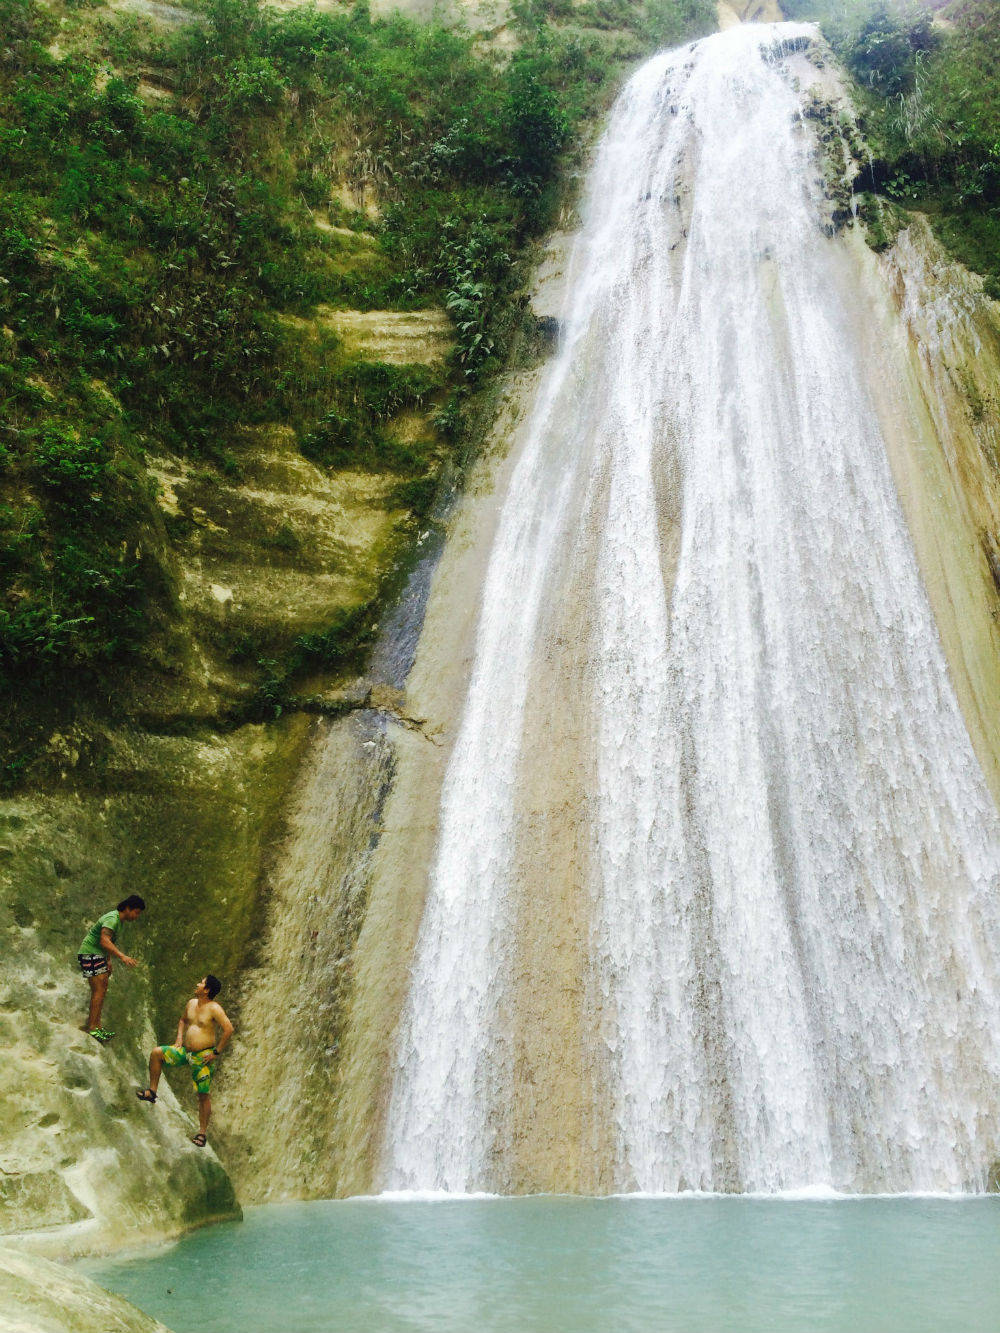 Da-o Falls is the tallest waterfall in Samboan, if not the whole of Cebu. It is a 90 feet vertical drop of water in lush surroundings of endemic and other tree and plant species.